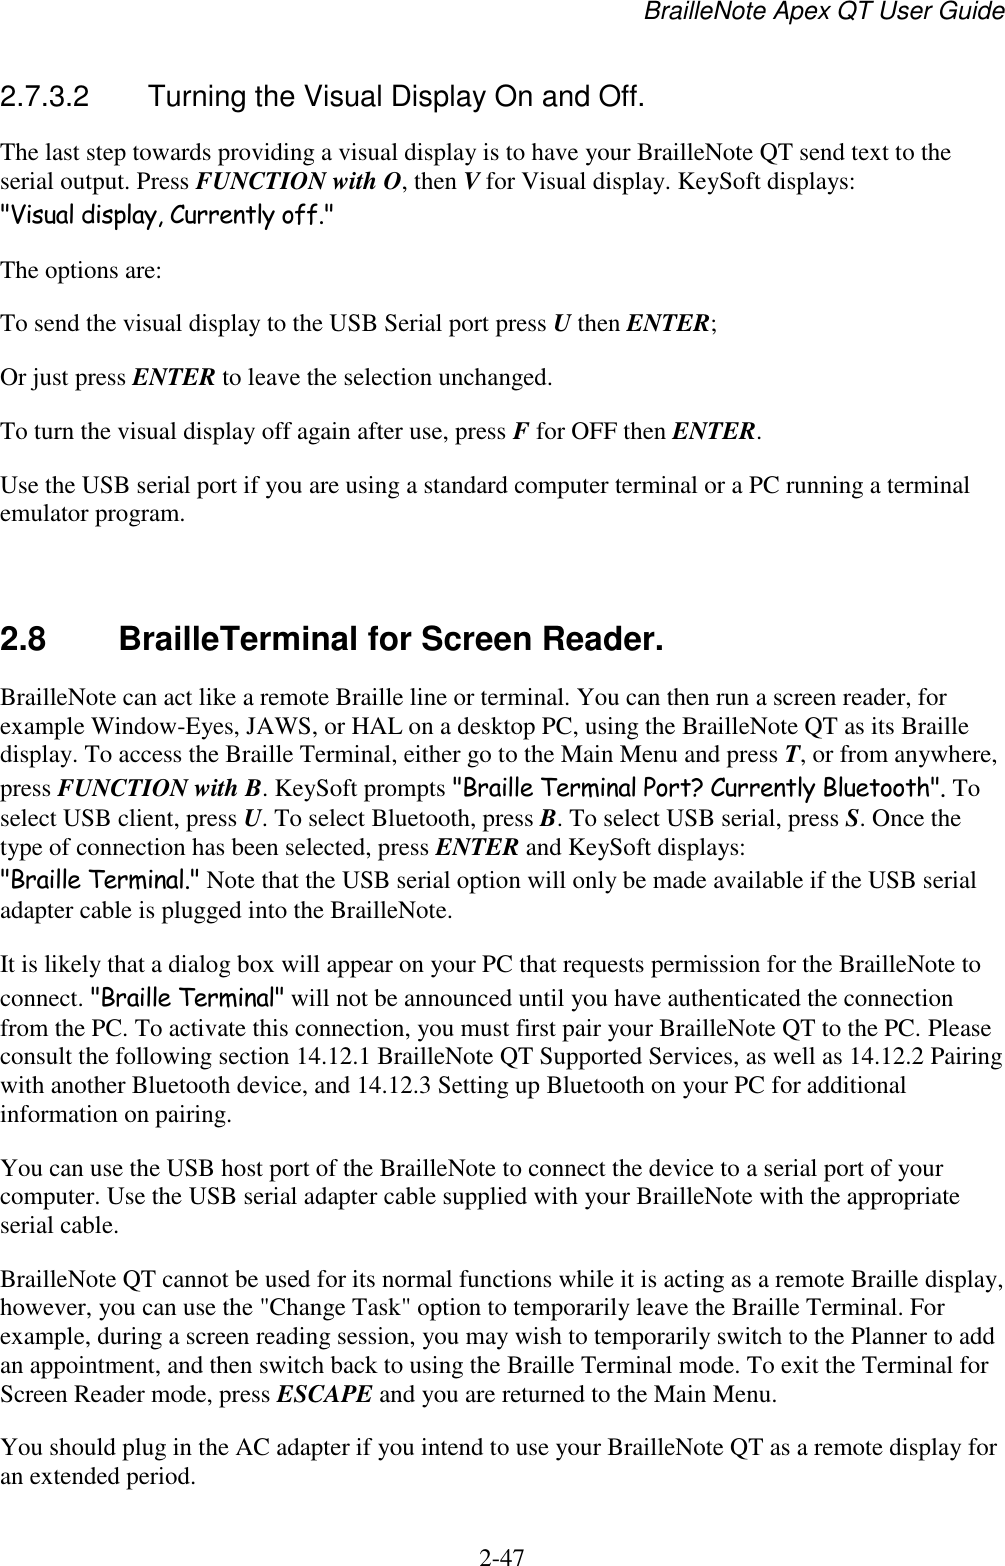 BrailleNote Apex QT User Guide  2-47   2.7.3.2  Turning the Visual Display On and Off. The last step towards providing a visual display is to have your BrailleNote QT send text to the serial output. Press FUNCTION with O, then V for Visual display. KeySoft displays: &quot;Visual display, Currently off.&quot; The options are: To send the visual display to the USB Serial port press U then ENTER; Or just press ENTER to leave the selection unchanged. To turn the visual display off again after use, press F for OFF then ENTER. Use the USB serial port if you are using a standard computer terminal or a PC running a terminal emulator program.   2.8  BrailleTerminal for Screen Reader. BrailleNote can act like a remote Braille line or terminal. You can then run a screen reader, for example Window-Eyes, JAWS, or HAL on a desktop PC, using the BrailleNote QT as its Braille display. To access the Braille Terminal, either go to the Main Menu and press T, or from anywhere, press FUNCTION with B. KeySoft prompts &quot;Braille Terminal Port? Currently Bluetooth&quot;. To select USB client, press U. To select Bluetooth, press B. To select USB serial, press S. Once the type of connection has been selected, press ENTER and KeySoft displays: &quot;Braille Terminal.&quot; Note that the USB serial option will only be made available if the USB serial adapter cable is plugged into the BrailleNote.  It is likely that a dialog box will appear on your PC that requests permission for the BrailleNote to connect. &quot;Braille Terminal&quot; will not be announced until you have authenticated the connection from the PC. To activate this connection, you must first pair your BrailleNote QT to the PC. Please consult the following section 14.12.1 BrailleNote QT Supported Services, as well as 14.12.2 Pairing with another Bluetooth device, and 14.12.3 Setting up Bluetooth on your PC for additional information on pairing. You can use the USB host port of the BrailleNote to connect the device to a serial port of your computer. Use the USB serial adapter cable supplied with your BrailleNote with the appropriate serial cable. BrailleNote QT cannot be used for its normal functions while it is acting as a remote Braille display, however, you can use the &quot;Change Task&quot; option to temporarily leave the Braille Terminal. For example, during a screen reading session, you may wish to temporarily switch to the Planner to add an appointment, and then switch back to using the Braille Terminal mode. To exit the Terminal for Screen Reader mode, press ESCAPE and you are returned to the Main Menu. You should plug in the AC adapter if you intend to use your BrailleNote QT as a remote display for an extended period. 